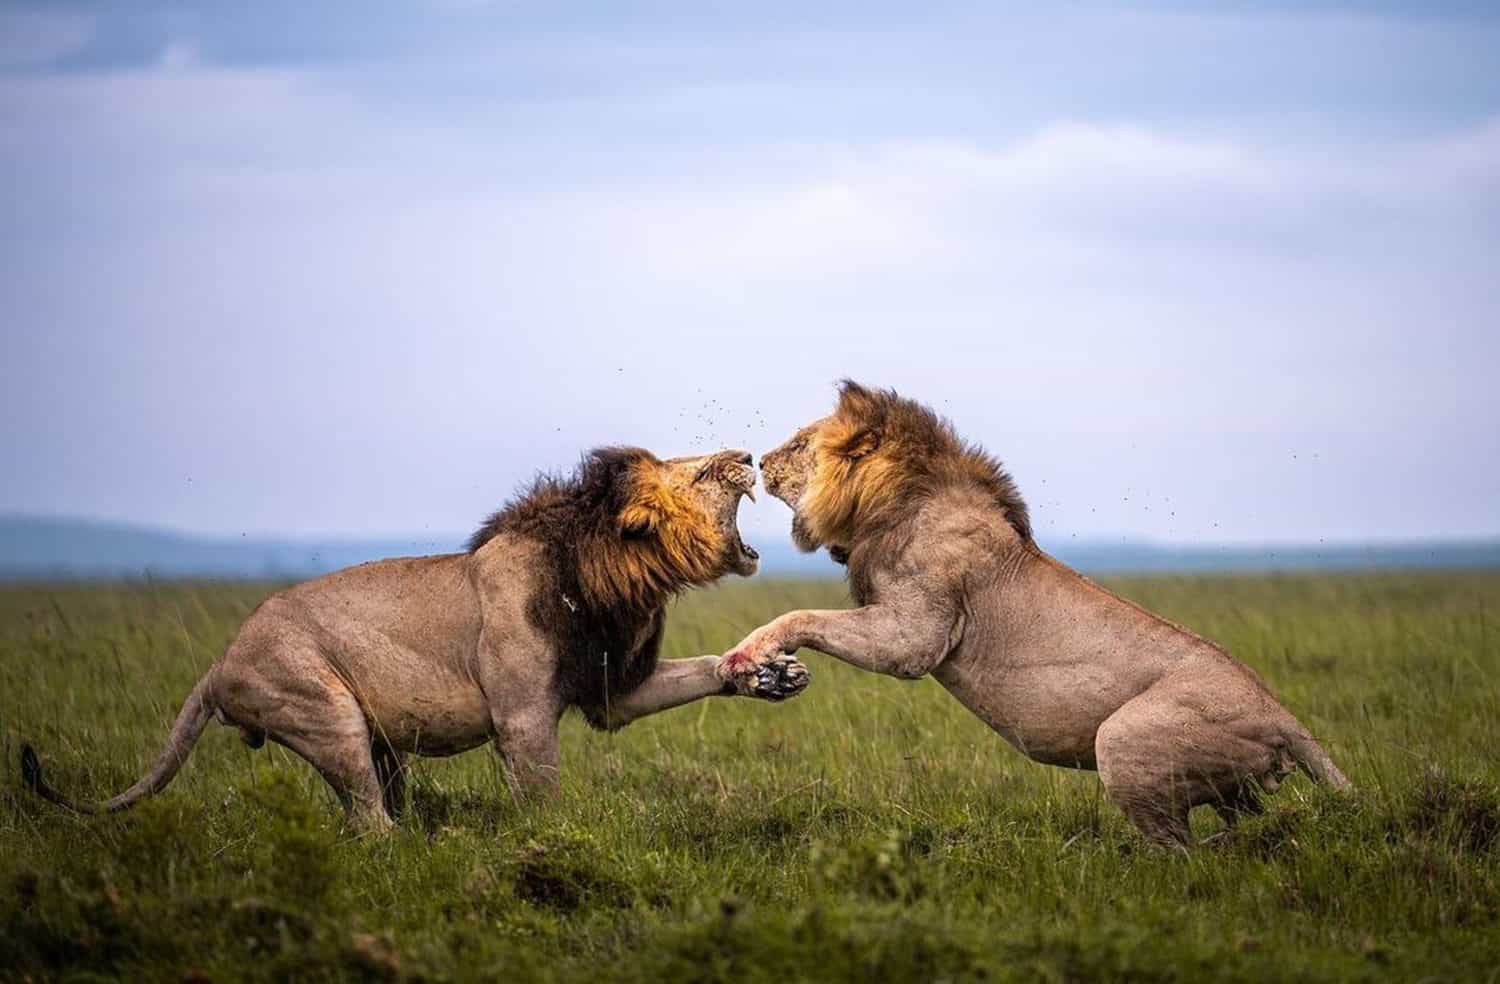 Two Lions Roaring at each other in Fighting mode